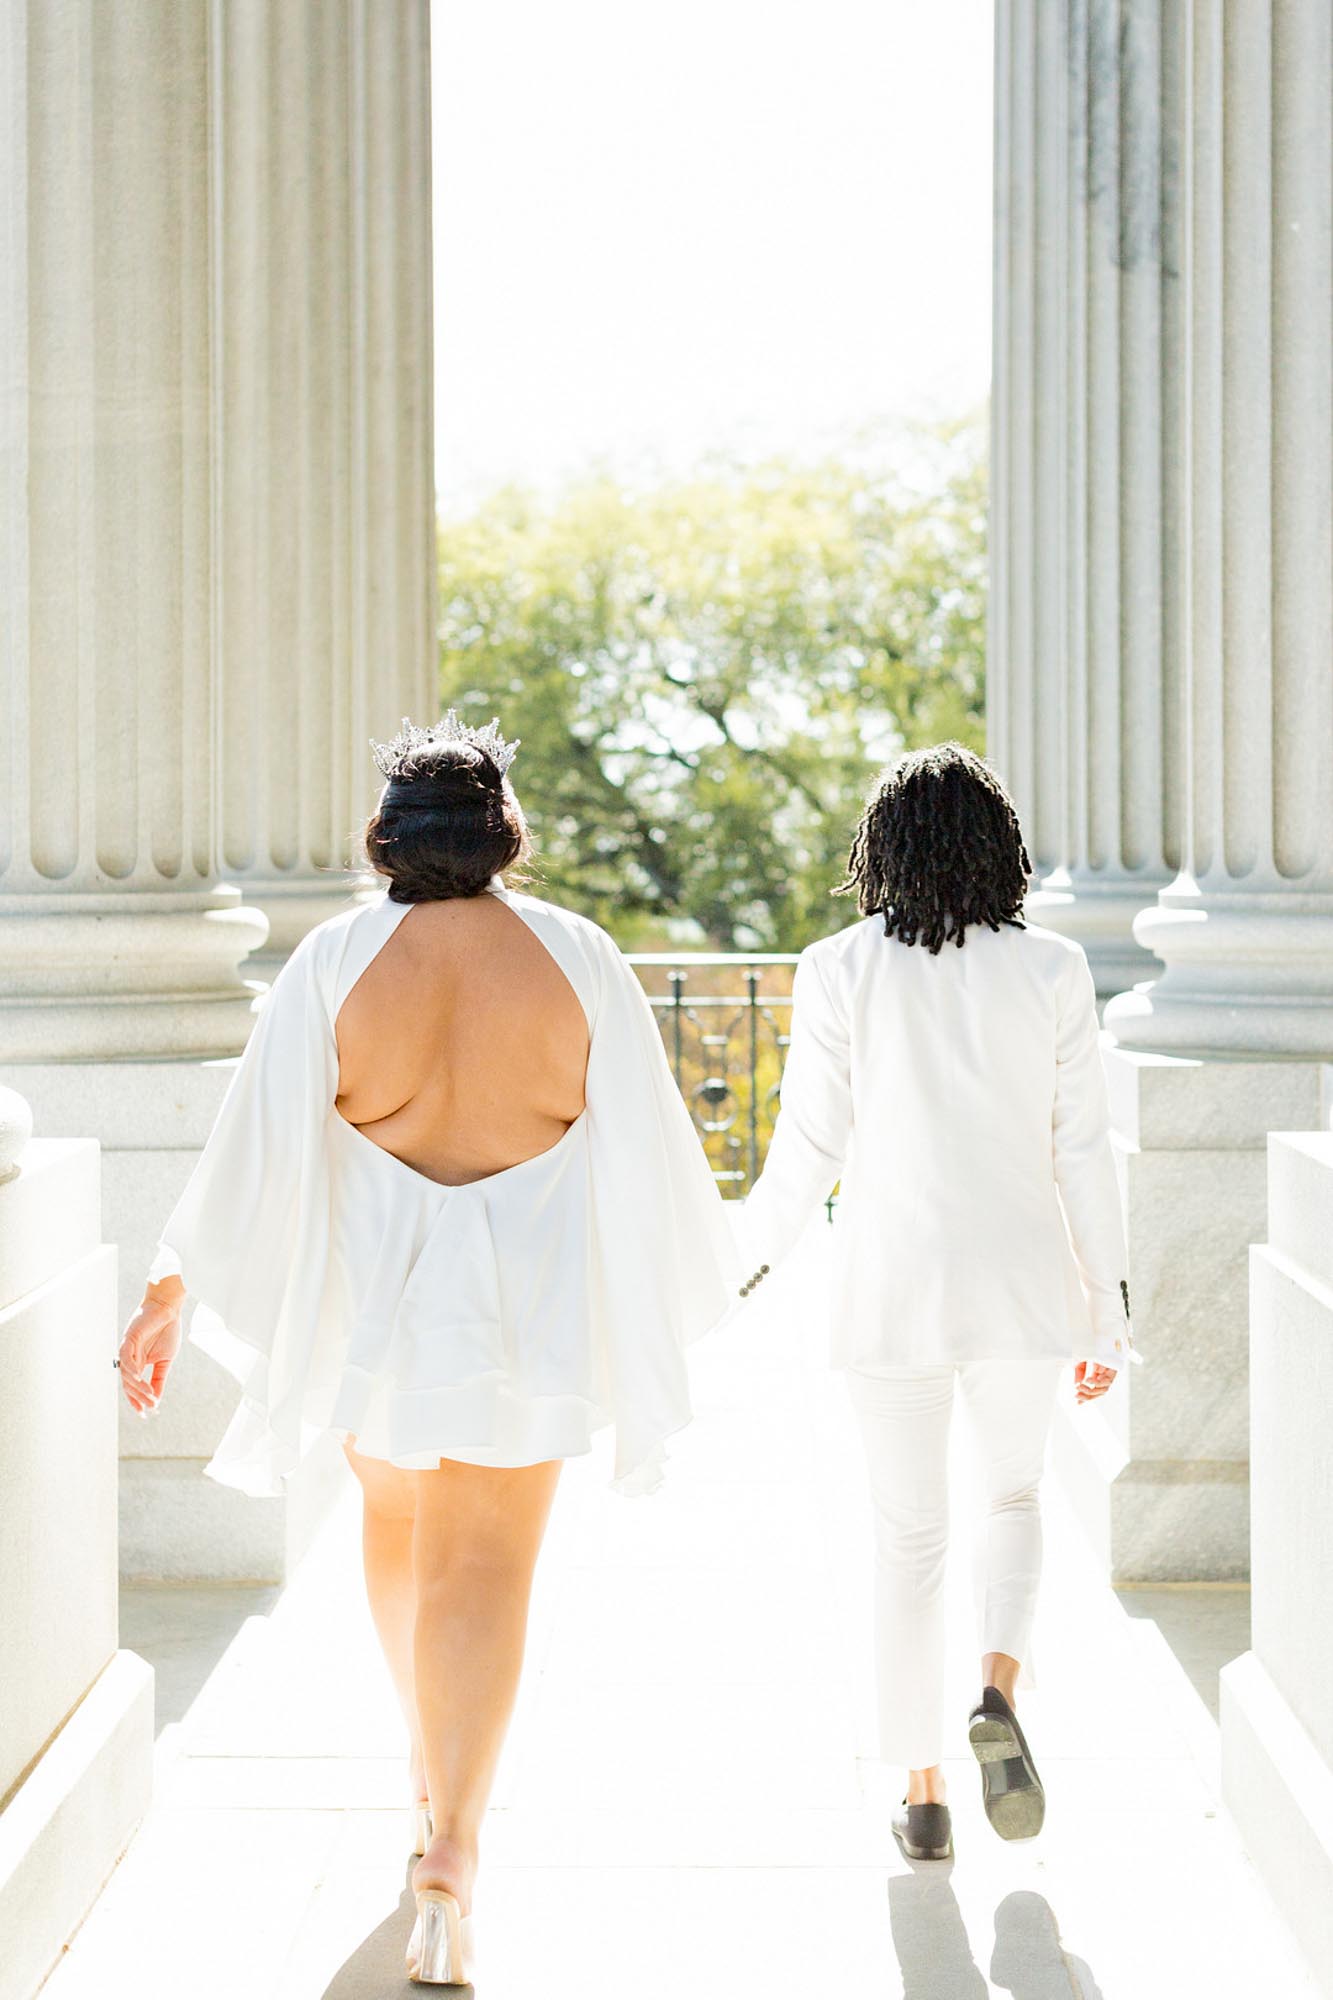 Sunny South Carolina elopement surrounded by greenery | Jessica Hunt Photography | Featured on Equally Wed, the leading LGBTQ+ wedding magazine white tux, cut out dress, tiara, crown, gold rimmed glasses